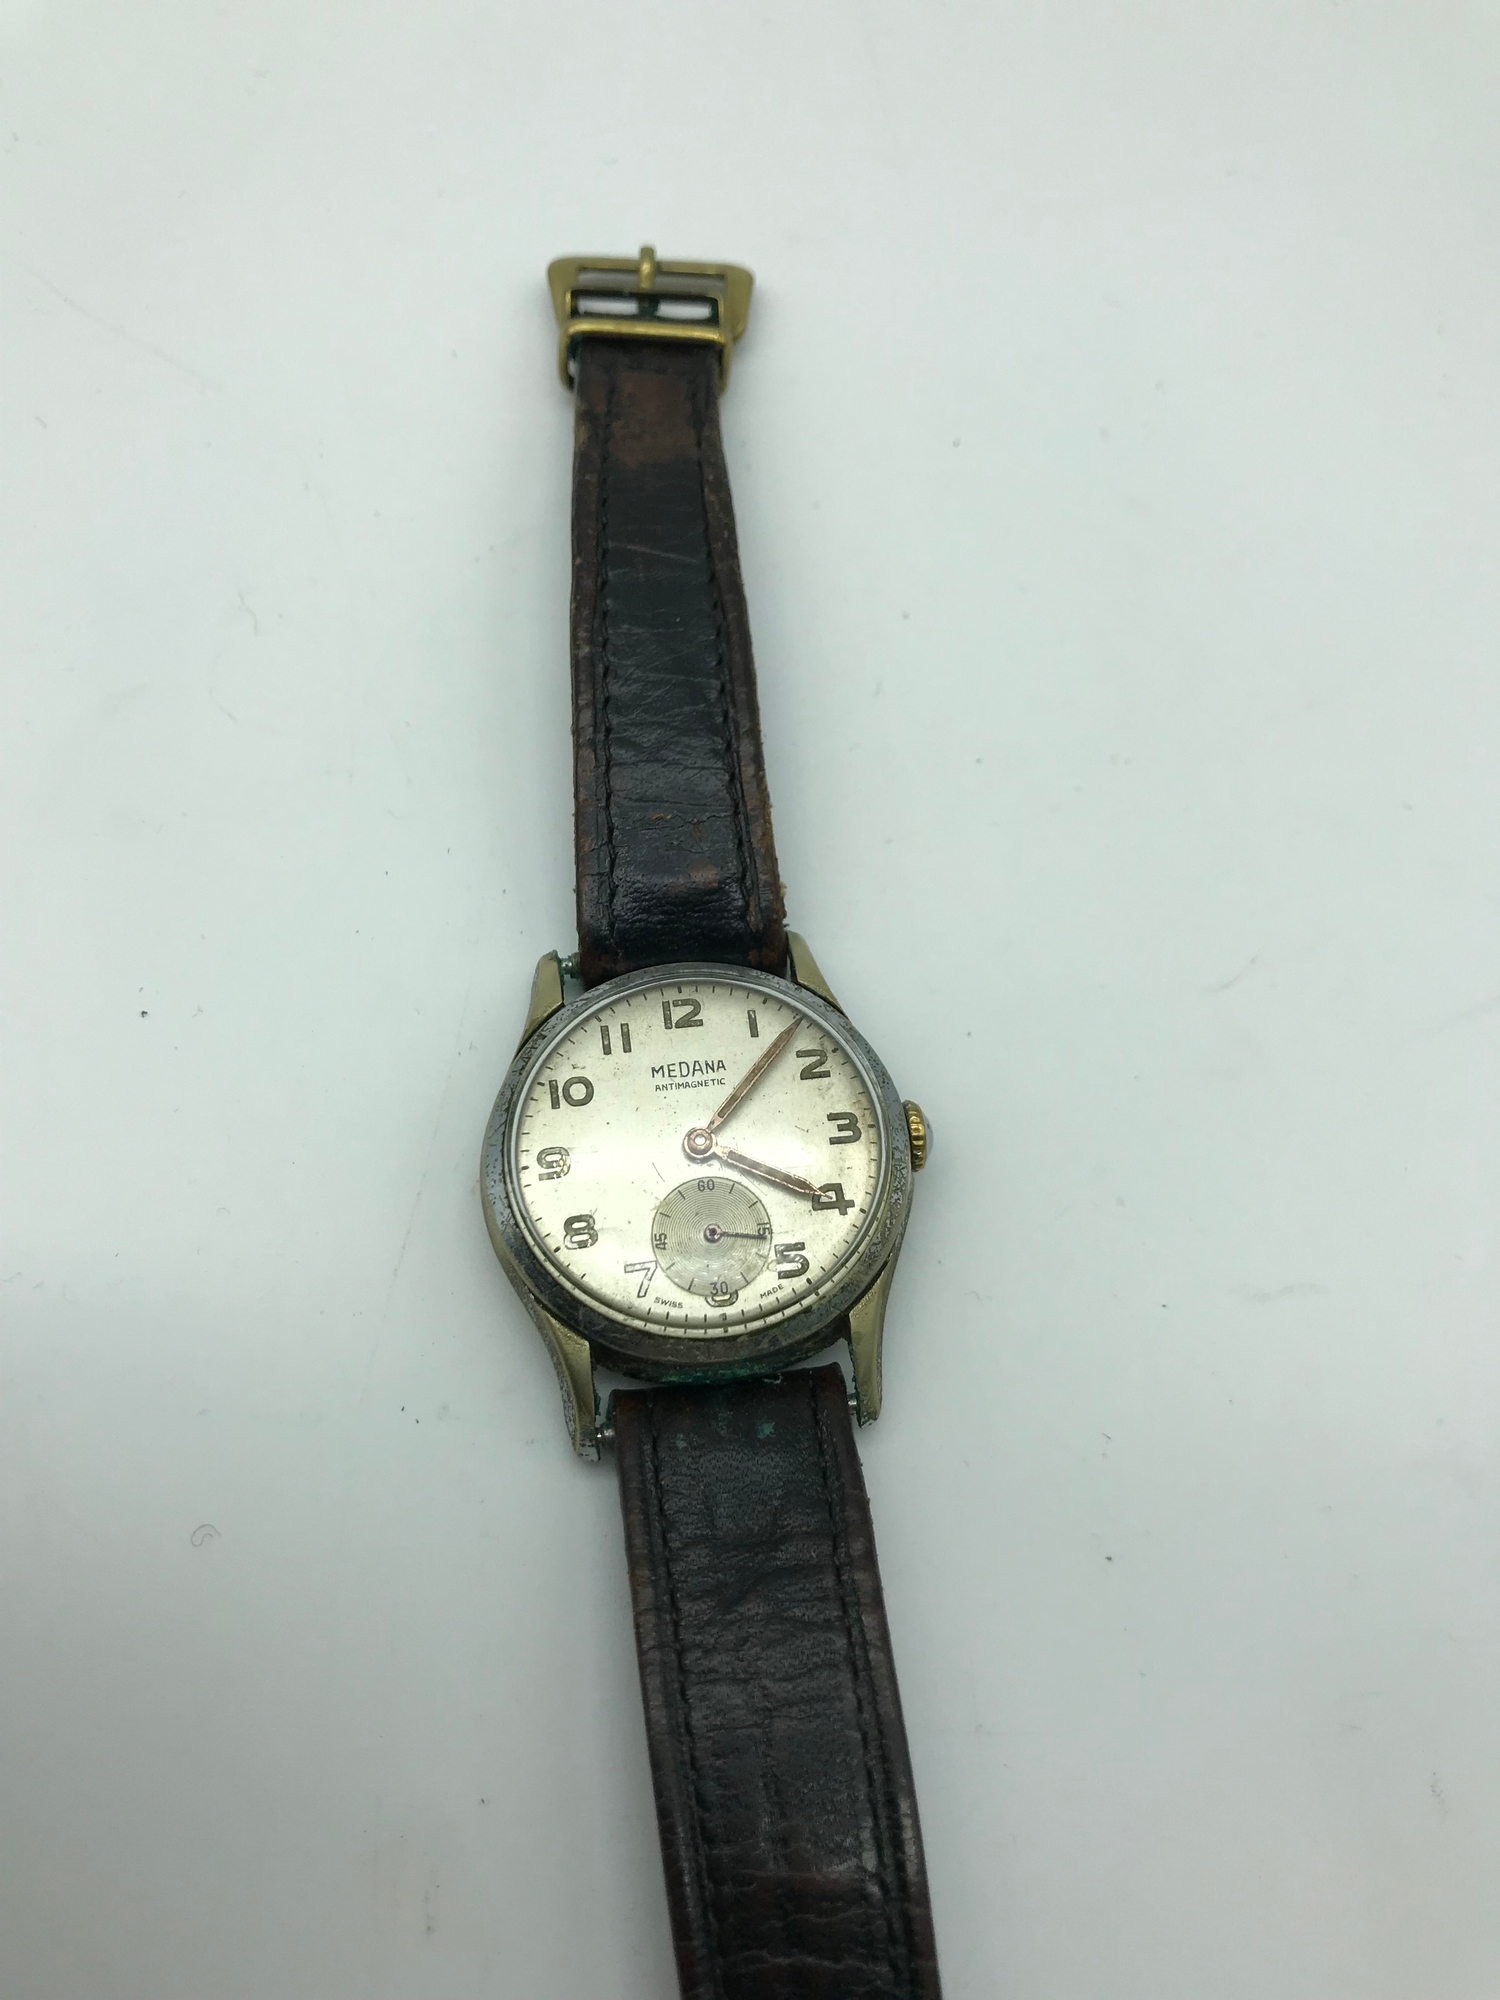 Vintage Medana Antimagnetic wrist watch, In a working condition.